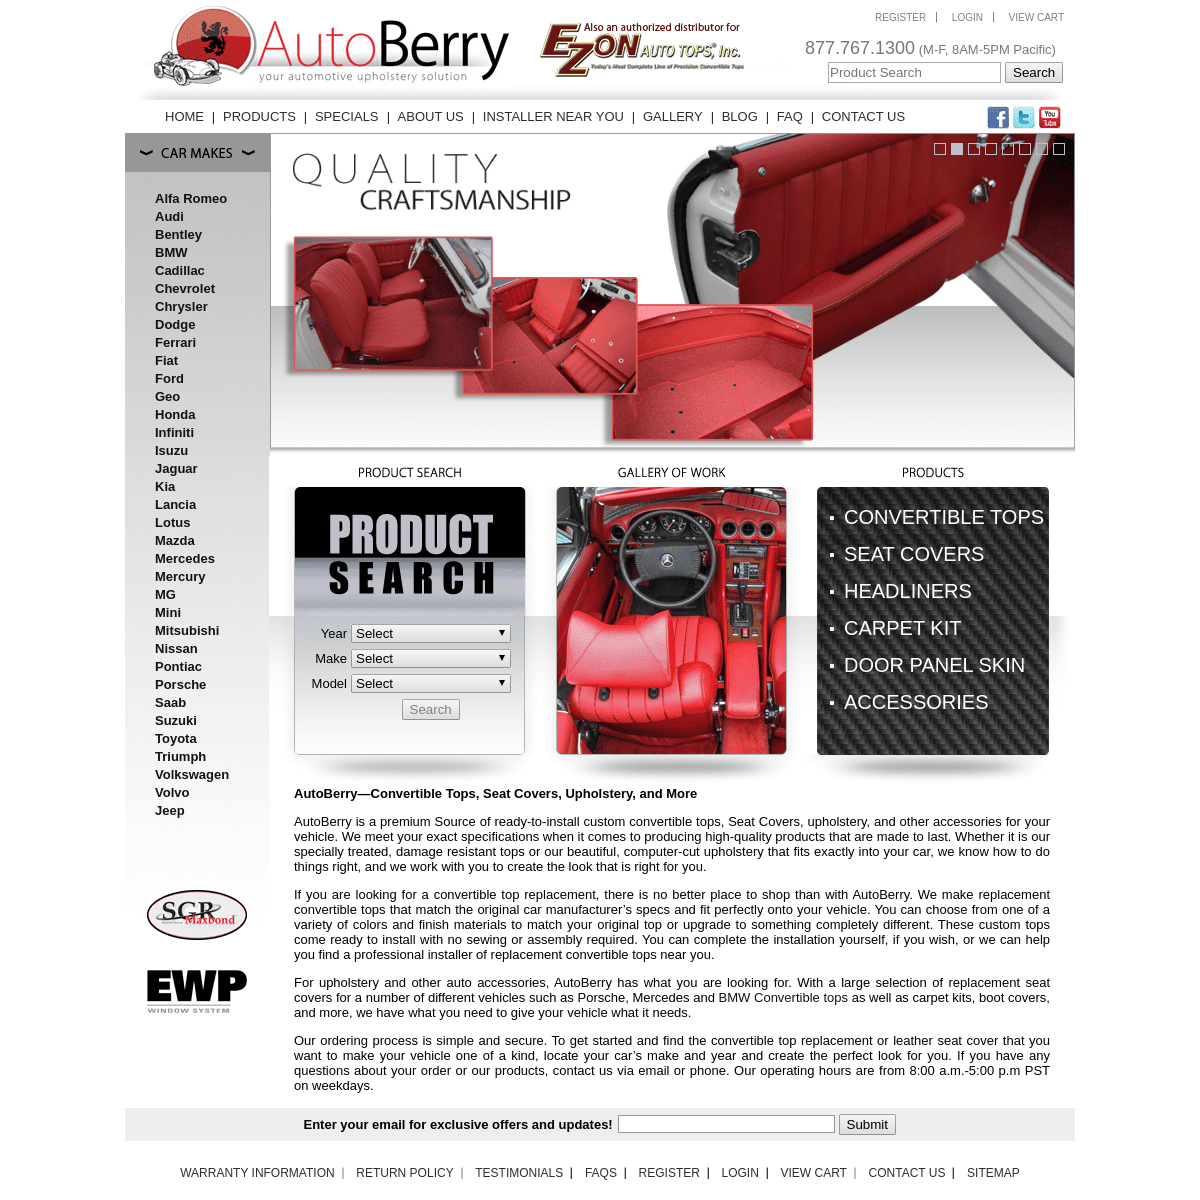 A complete backup of autoberry.com